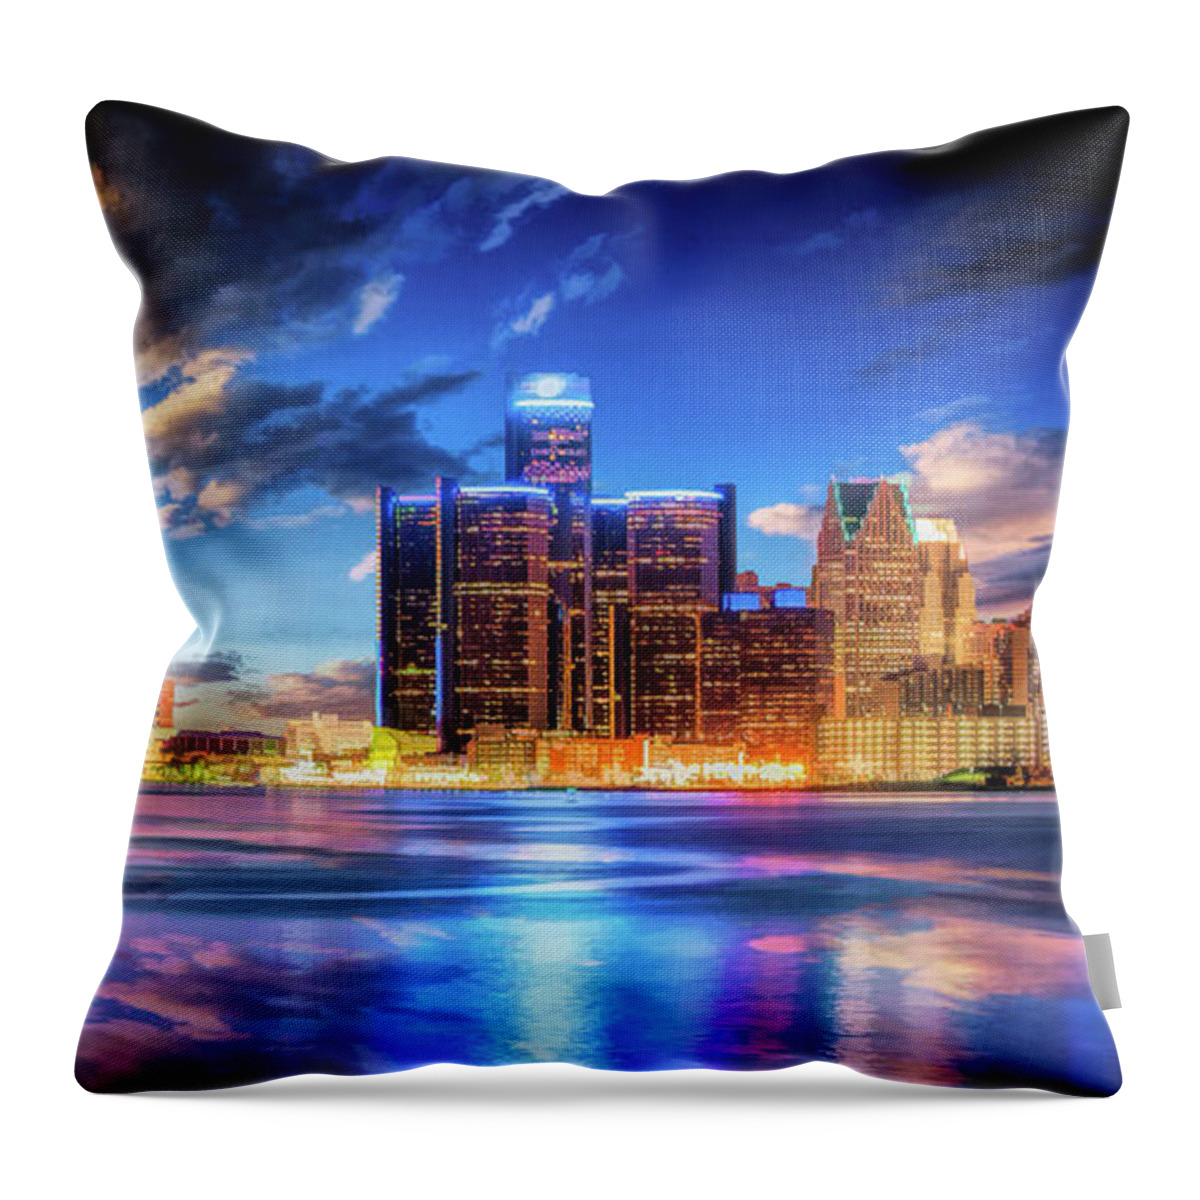 Detroit Throw Pillow featuring the painting Detroit Skyline Sunset by Christopher Arndt